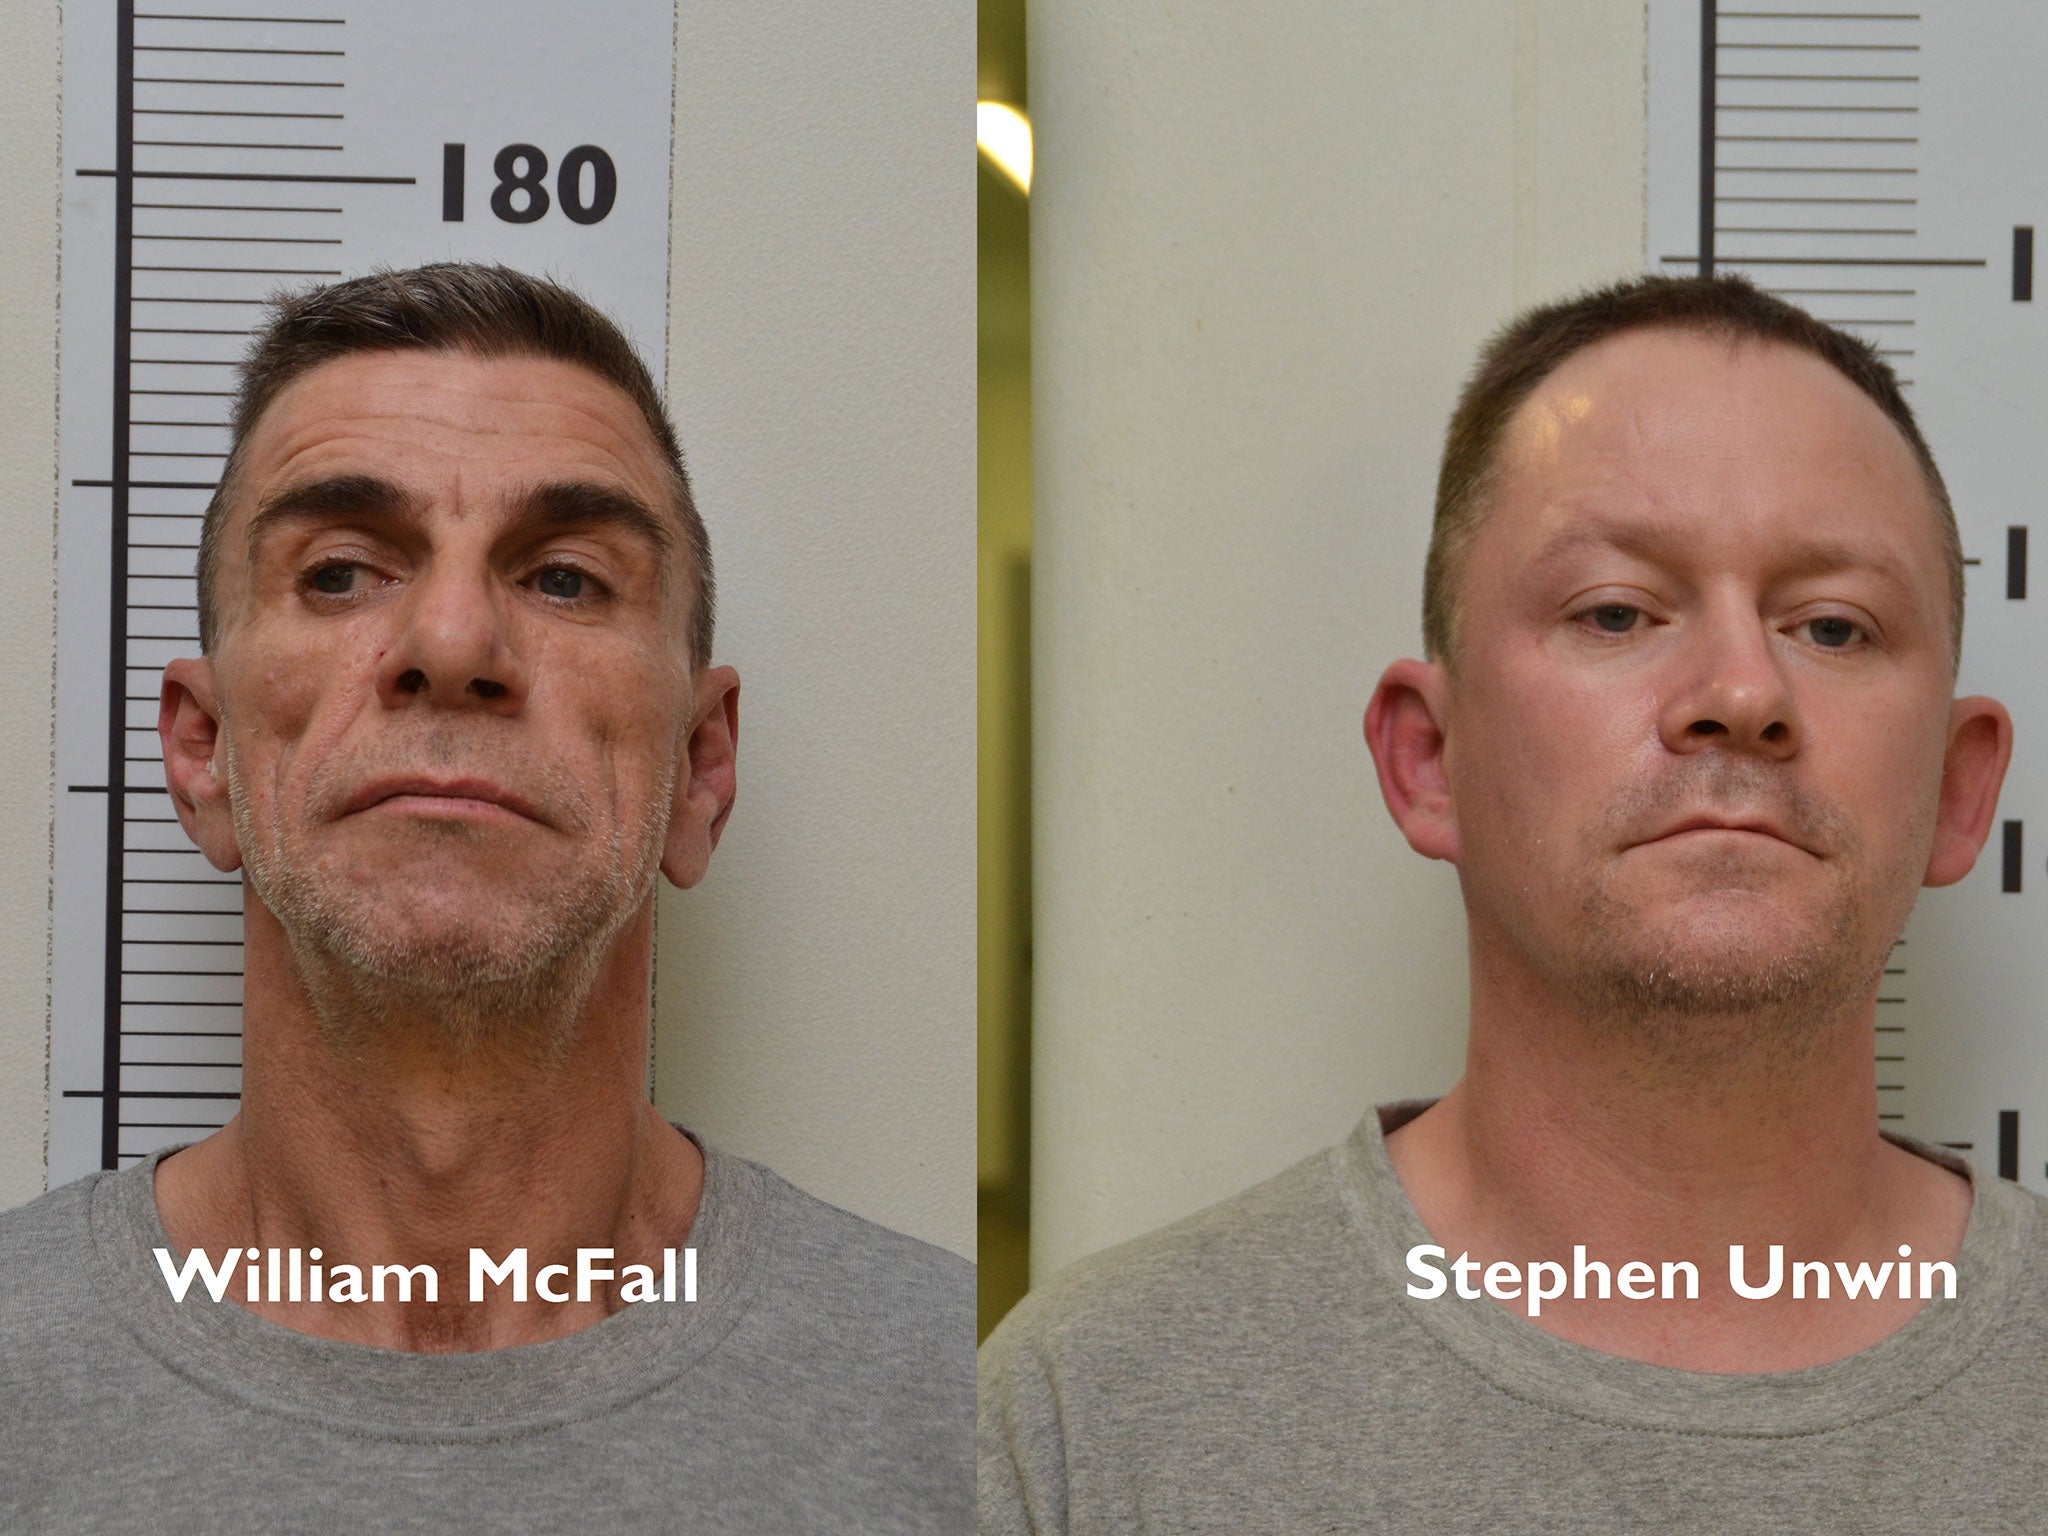 Stephen Unwin was convicted of rape and murder and John McFall was convicted of murder